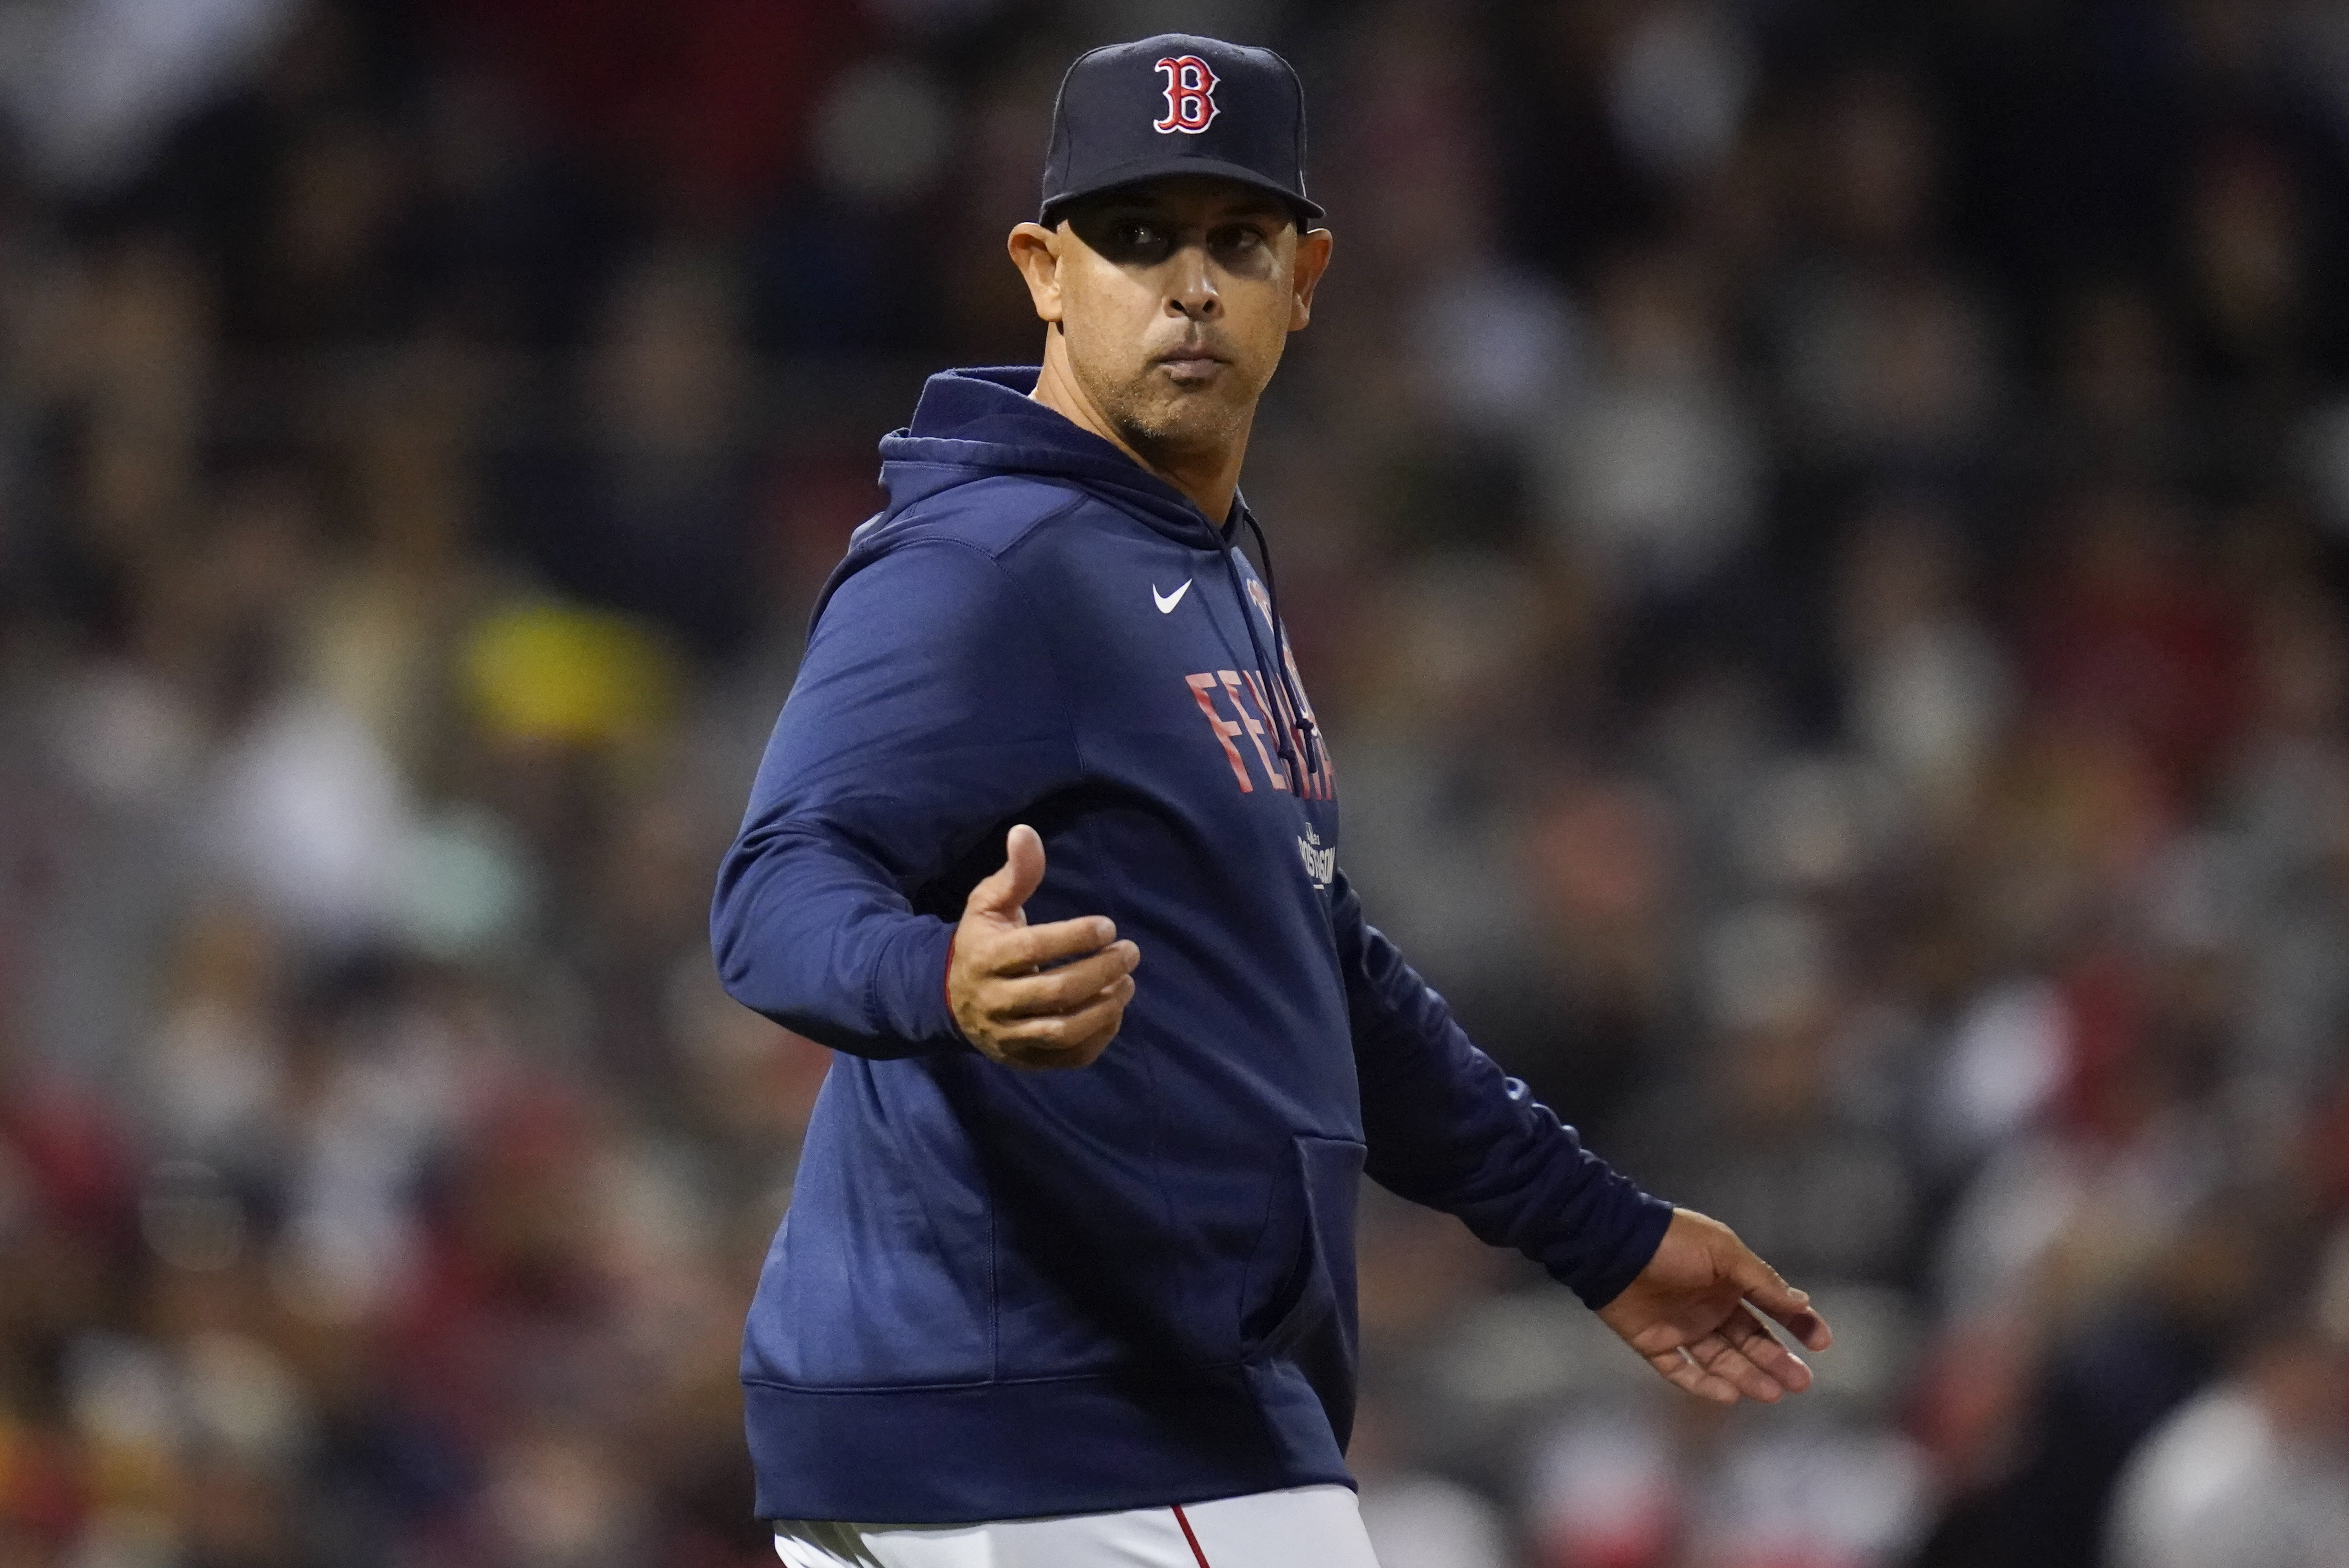 Red Sox set 2022 coaching staff, with Peter Fatse promoted to